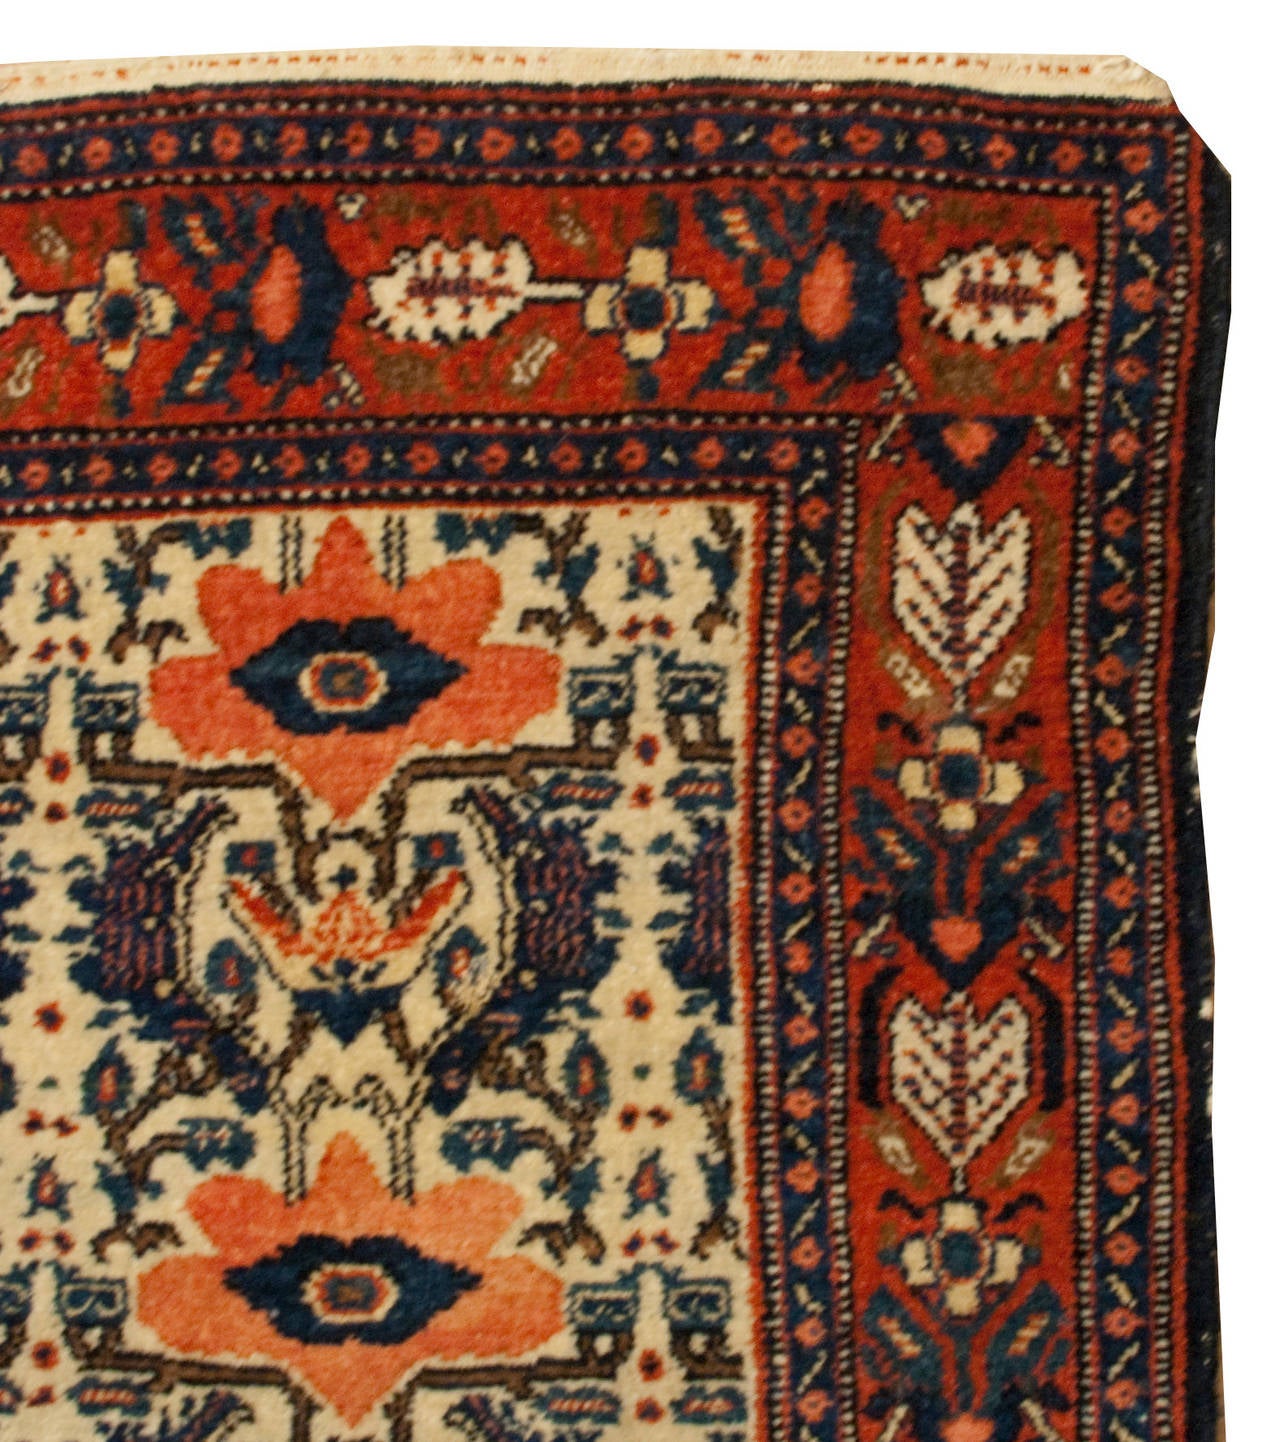 A wonderful early 20th century Persian Senneh rug with all-over red poppies and leaf pattern, surrounded by multiple complementary floral borders.